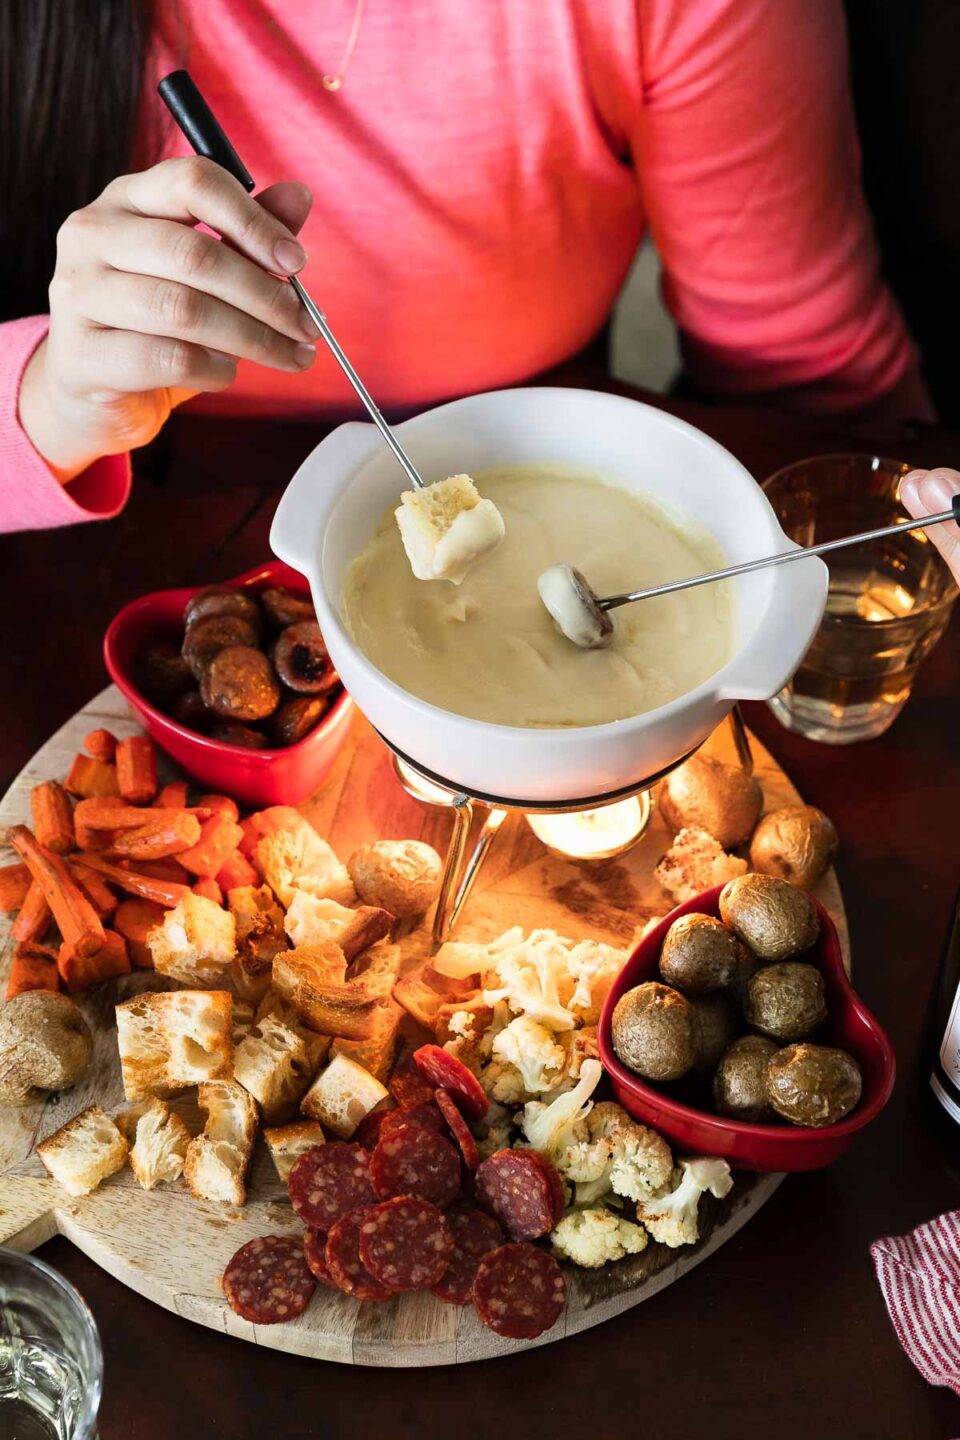 An overhead shot of a cheese fondue for two spread is set up on a wooden cheese board. Cheese fondue fills a white fondue pot or caquelon which rests atop the cheese board with bite-sized pieces of roasted carrots, bread, cauliflower, potatoes, chicken sausage, and mini salami for dipping surrounding. The cheese board sits atop a wood surface. A woman's hand holds a fondue fork with a piece of toasted bread attached and dips it into the fondue pot. While a man holds another fondue fork with a piece of chicken sausage on the end also dipping into the pot. Two glasses of white wine, and a red and white striped linen napkin rest alongside the cheese board.